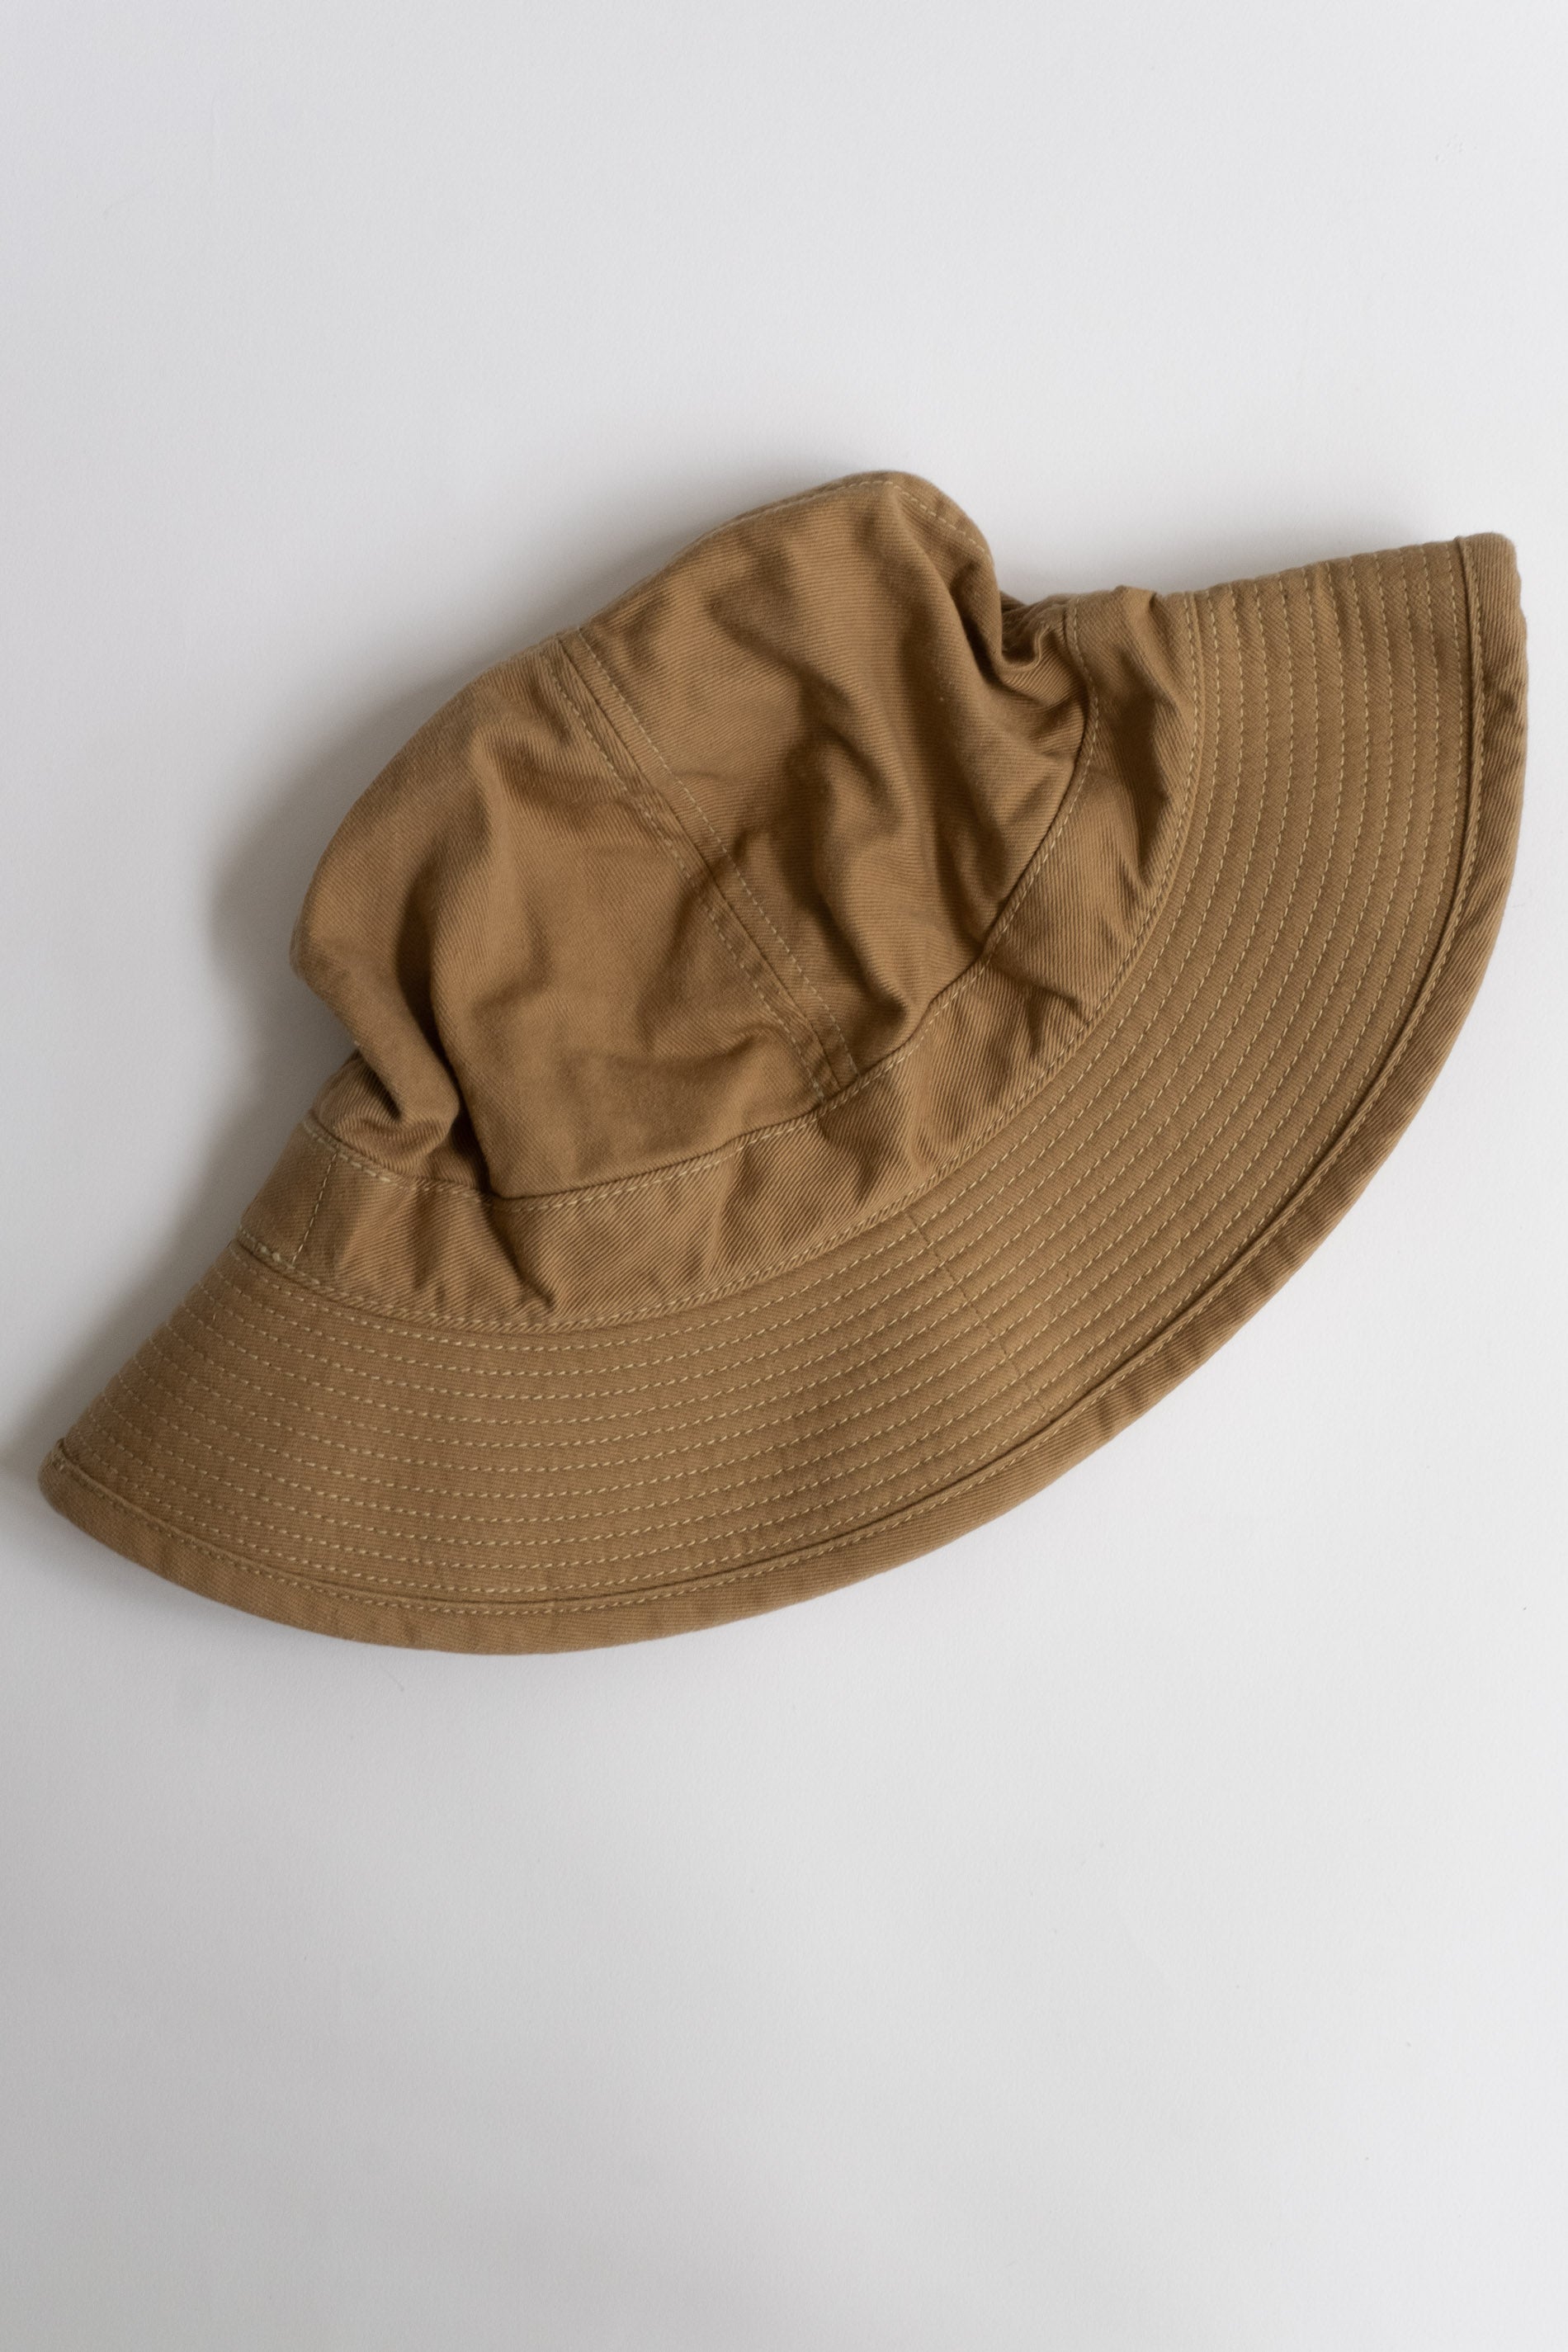 HAT KHAKI CHINO US IN – RELIQUARY orSlow | NAVY